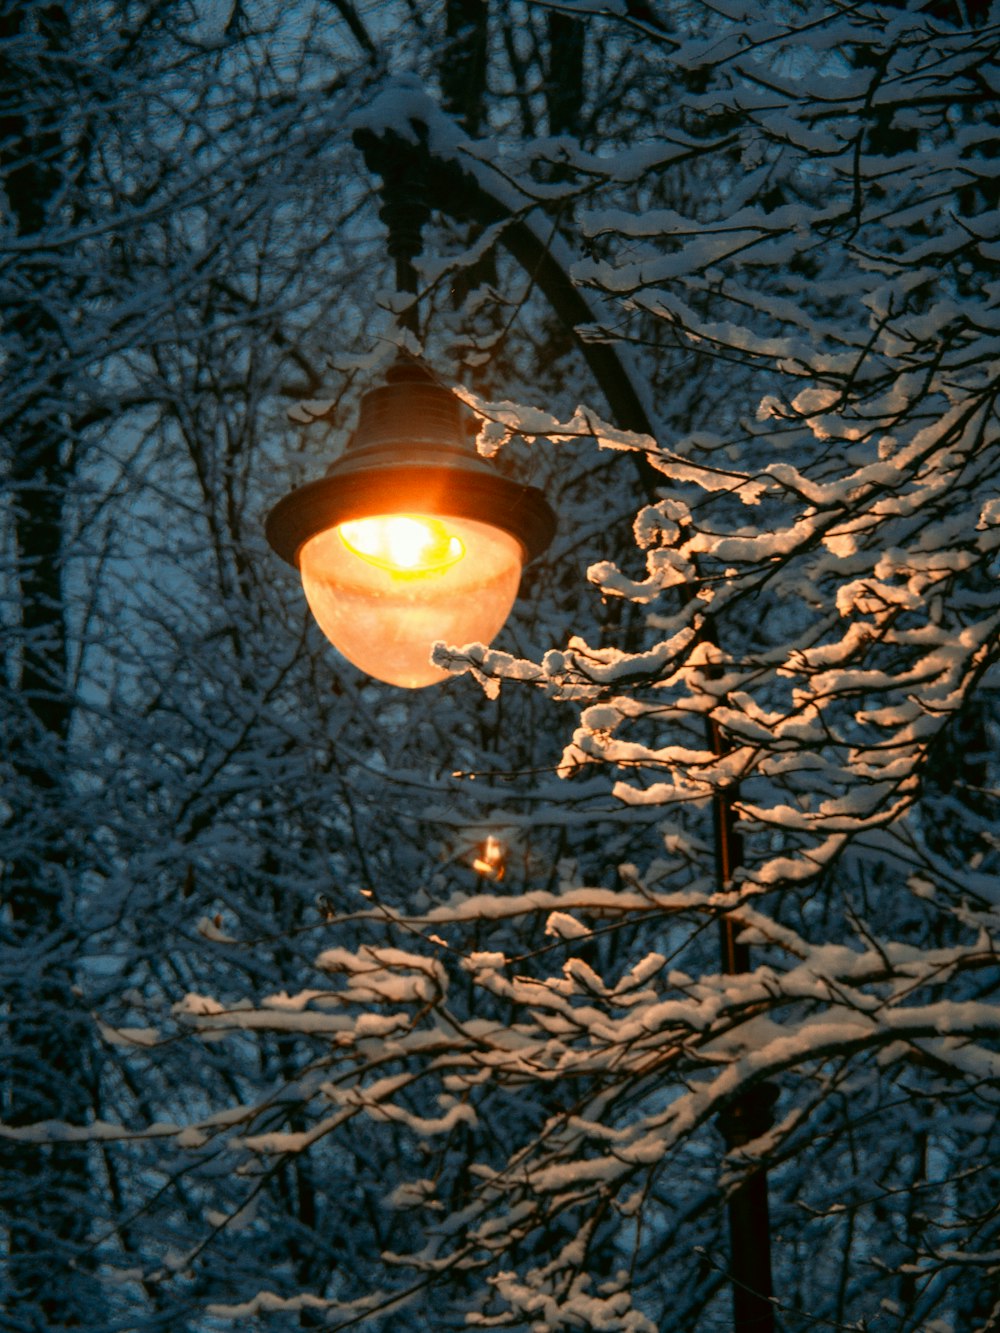 a street light in the middle of a snowy forest